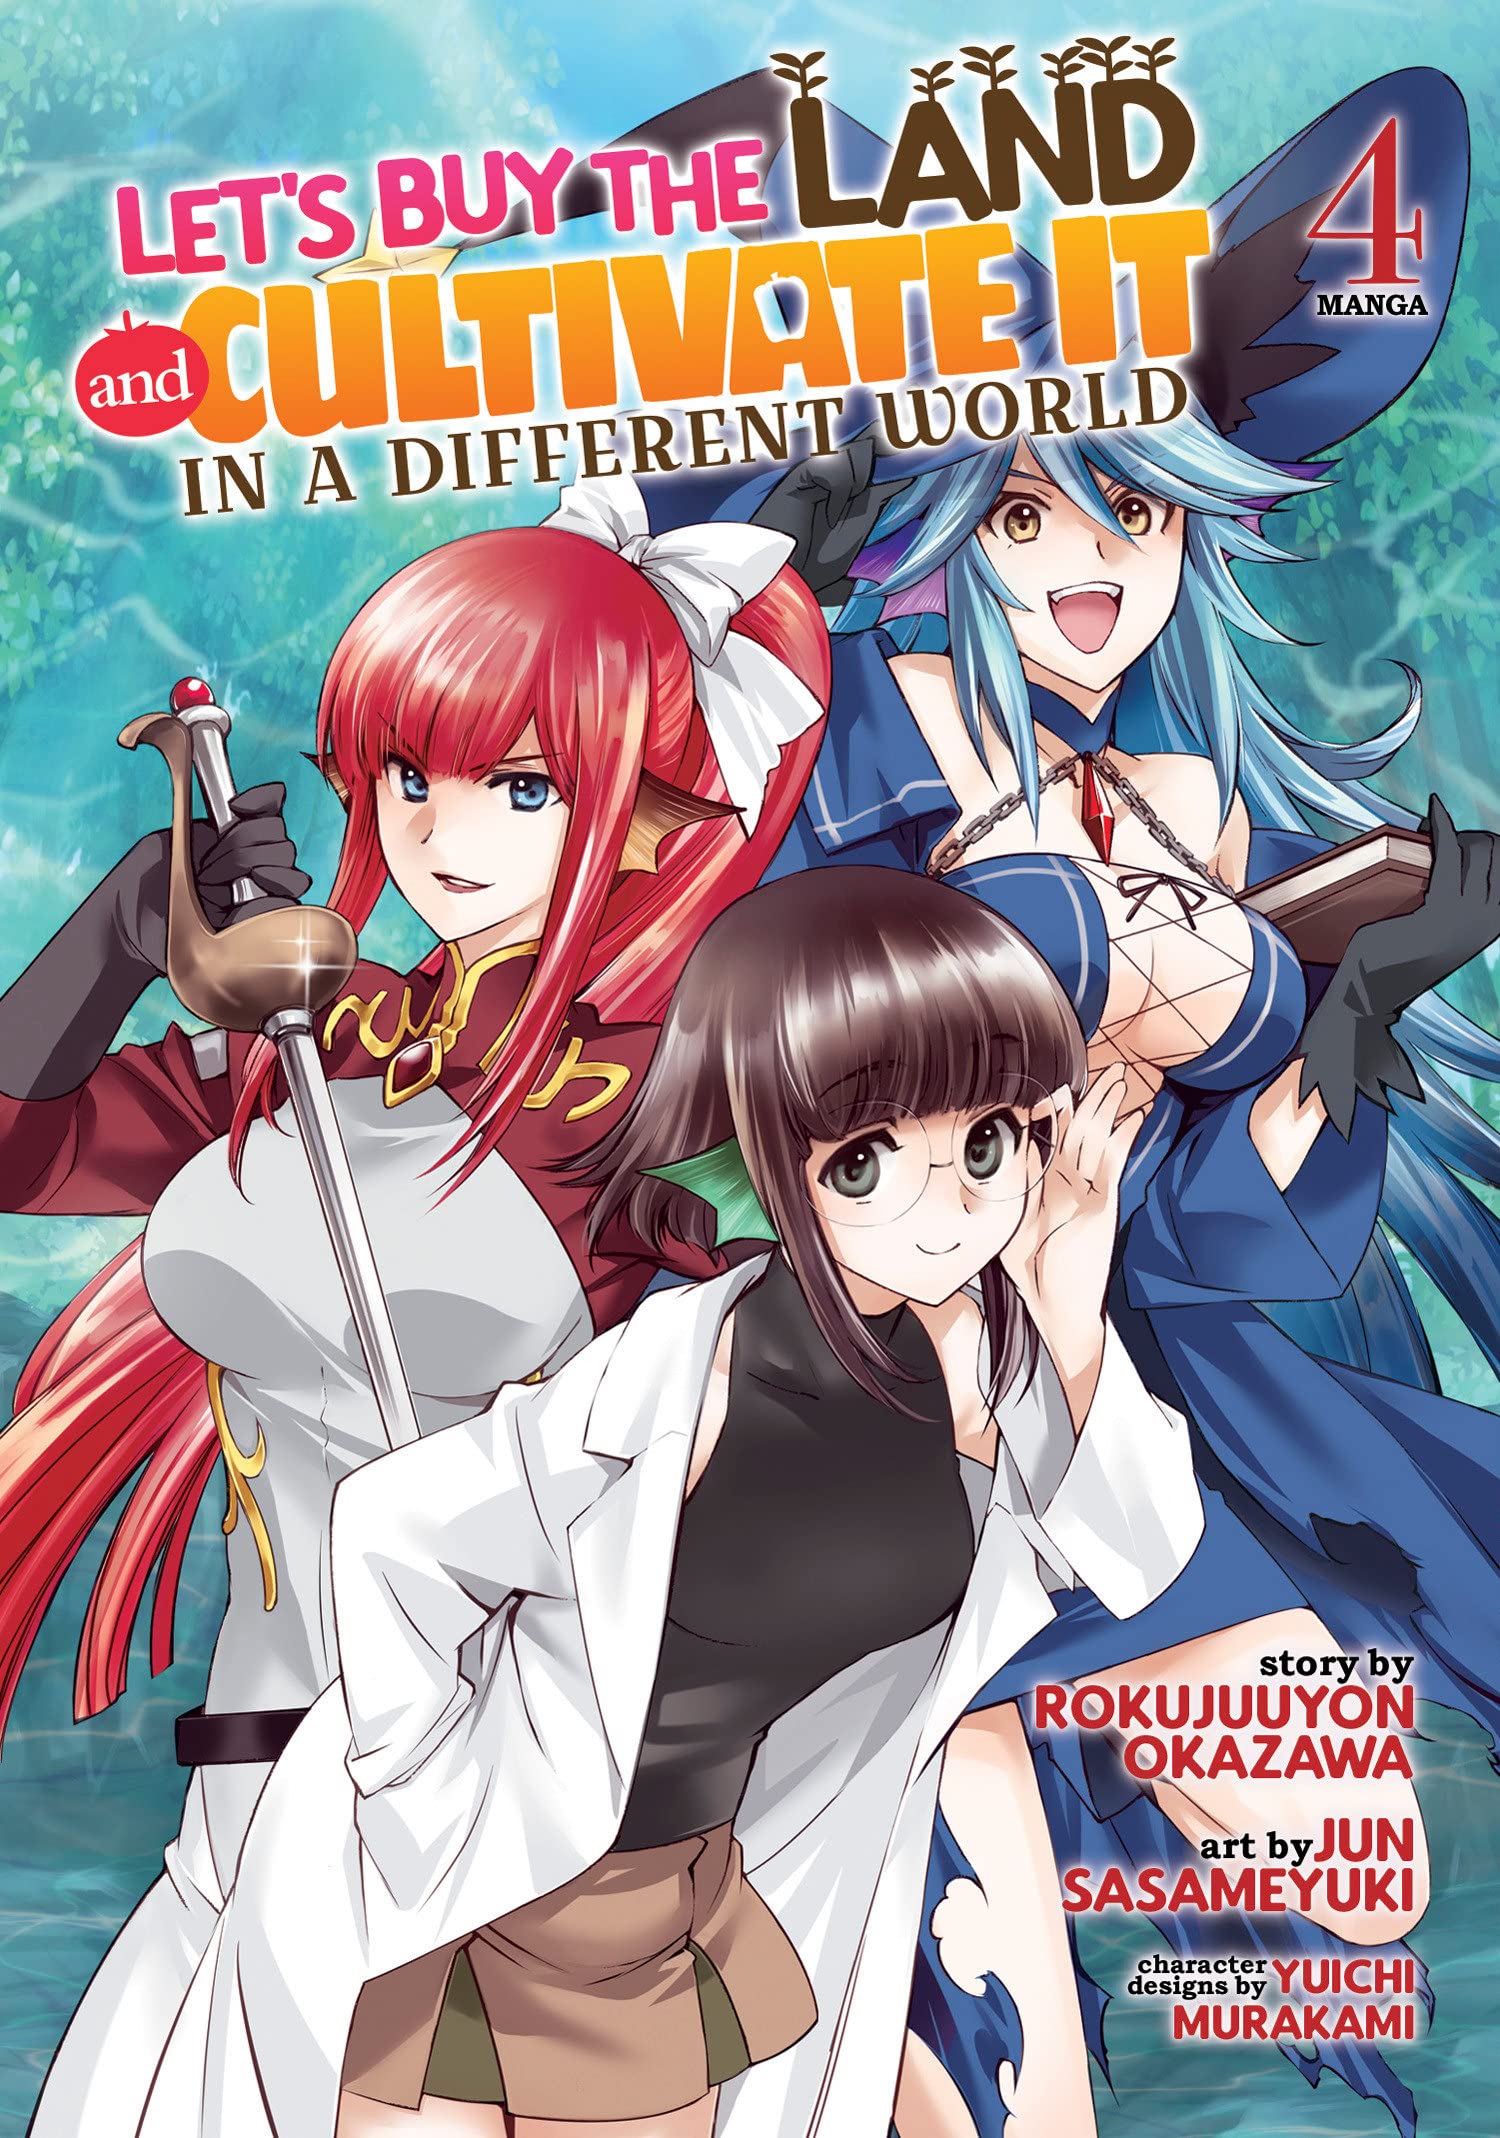 Let's Buy the Land and Cultivate It in a Different World (Manga) Vol. 04